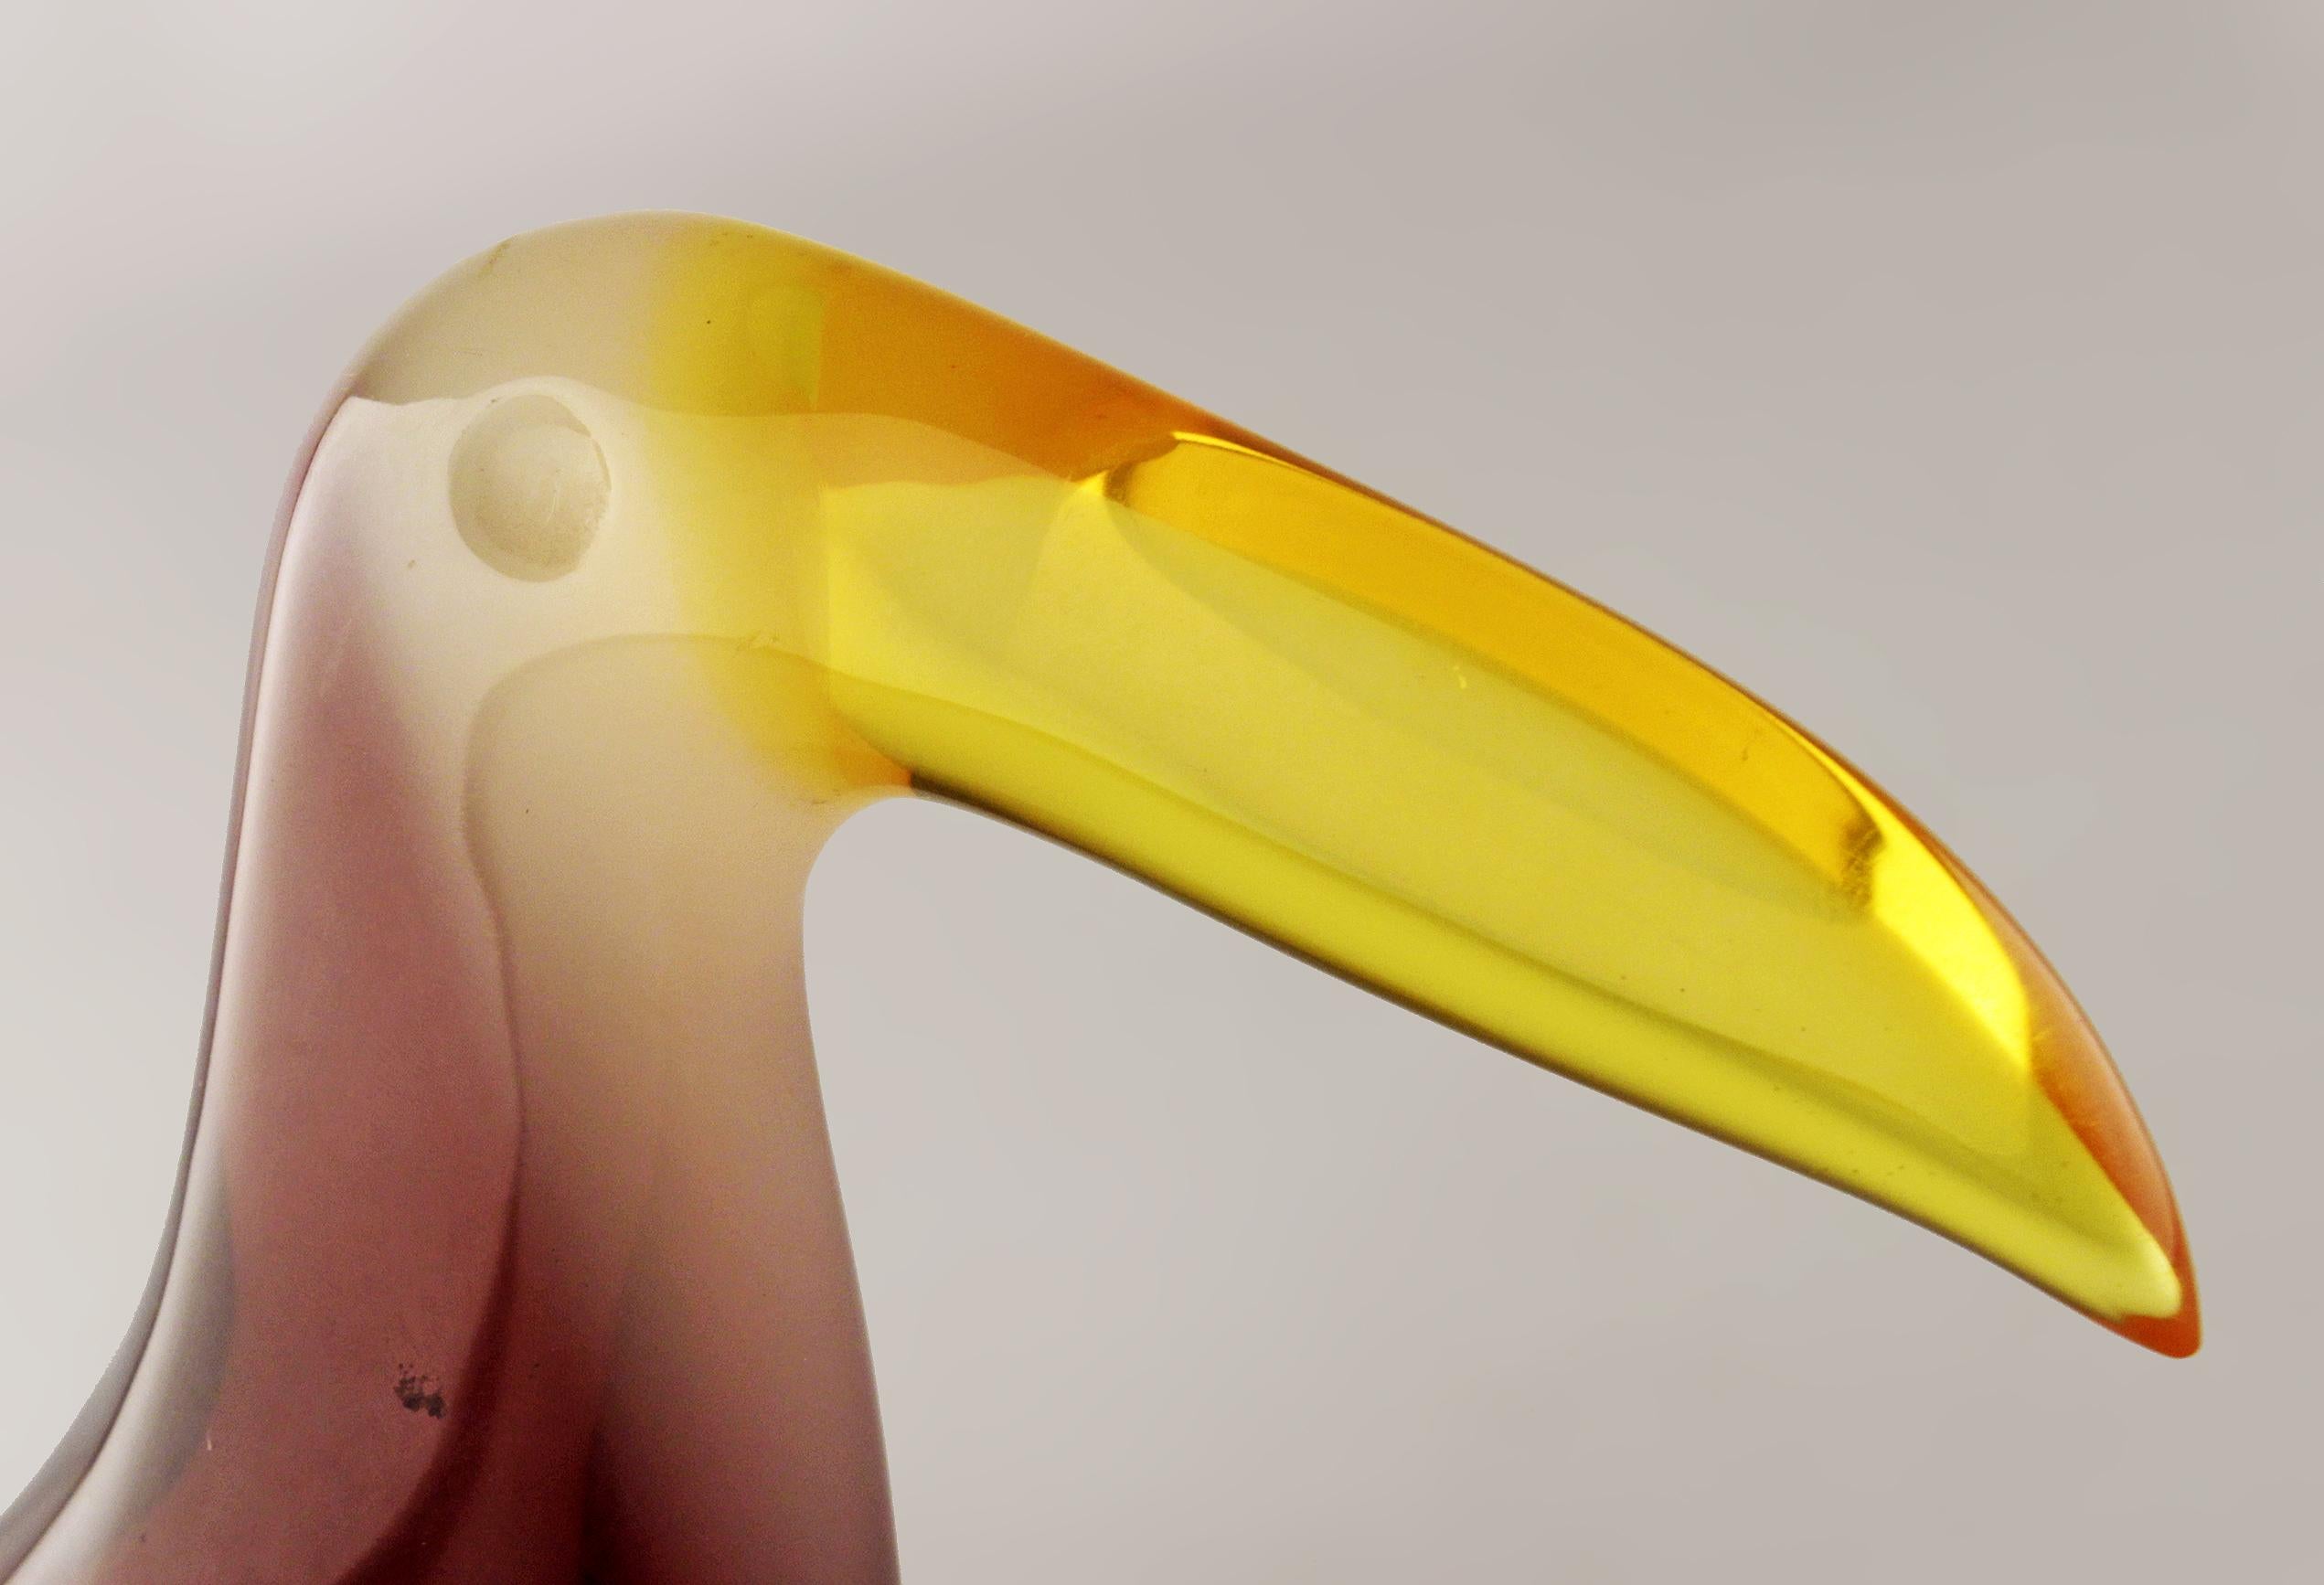 Mid-20th C. Brazilian Translucent Acrylic/Lucite Toucan Sculpture by A. Palatnik In Good Condition For Sale In North Miami, FL